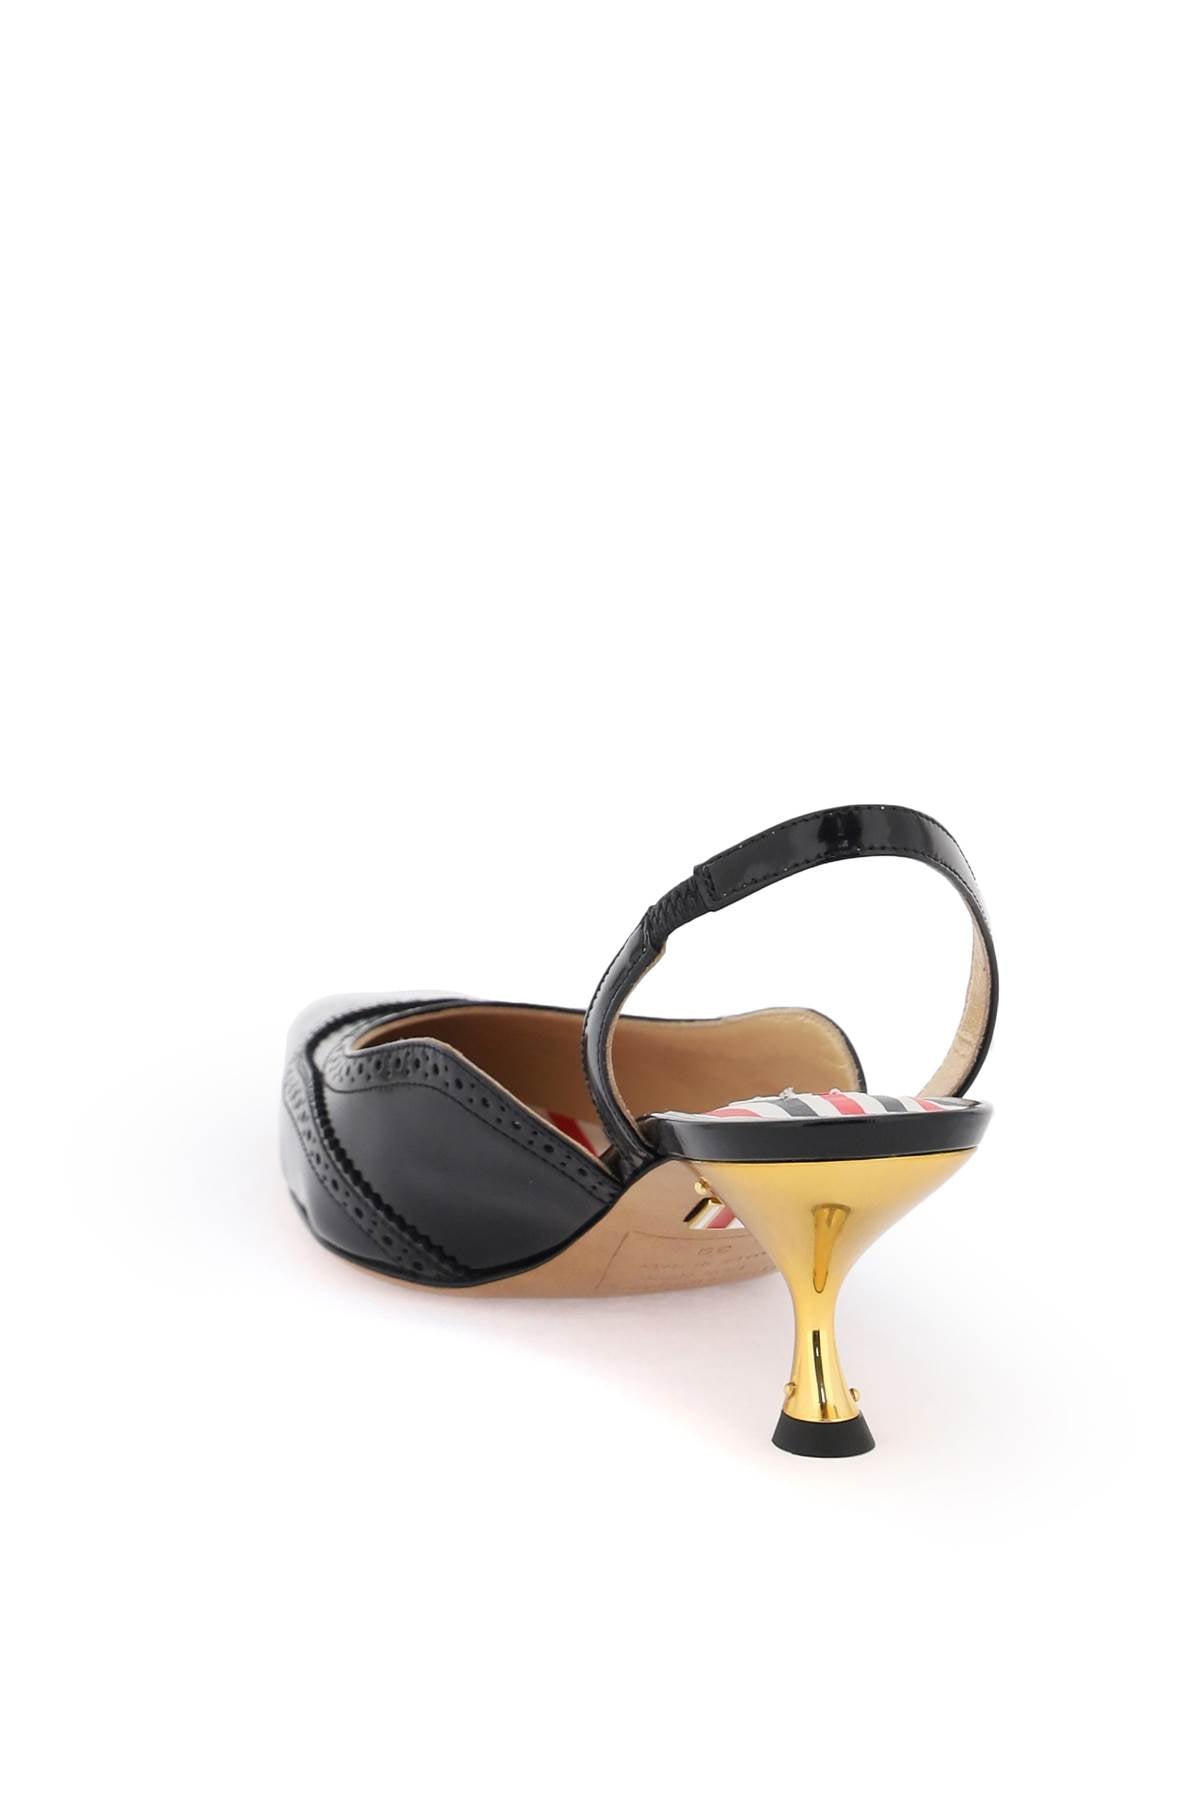 THOM BROWNE Elegant Black Slingback Pumps with Brogue Detailing and Mirrored Heel for Women